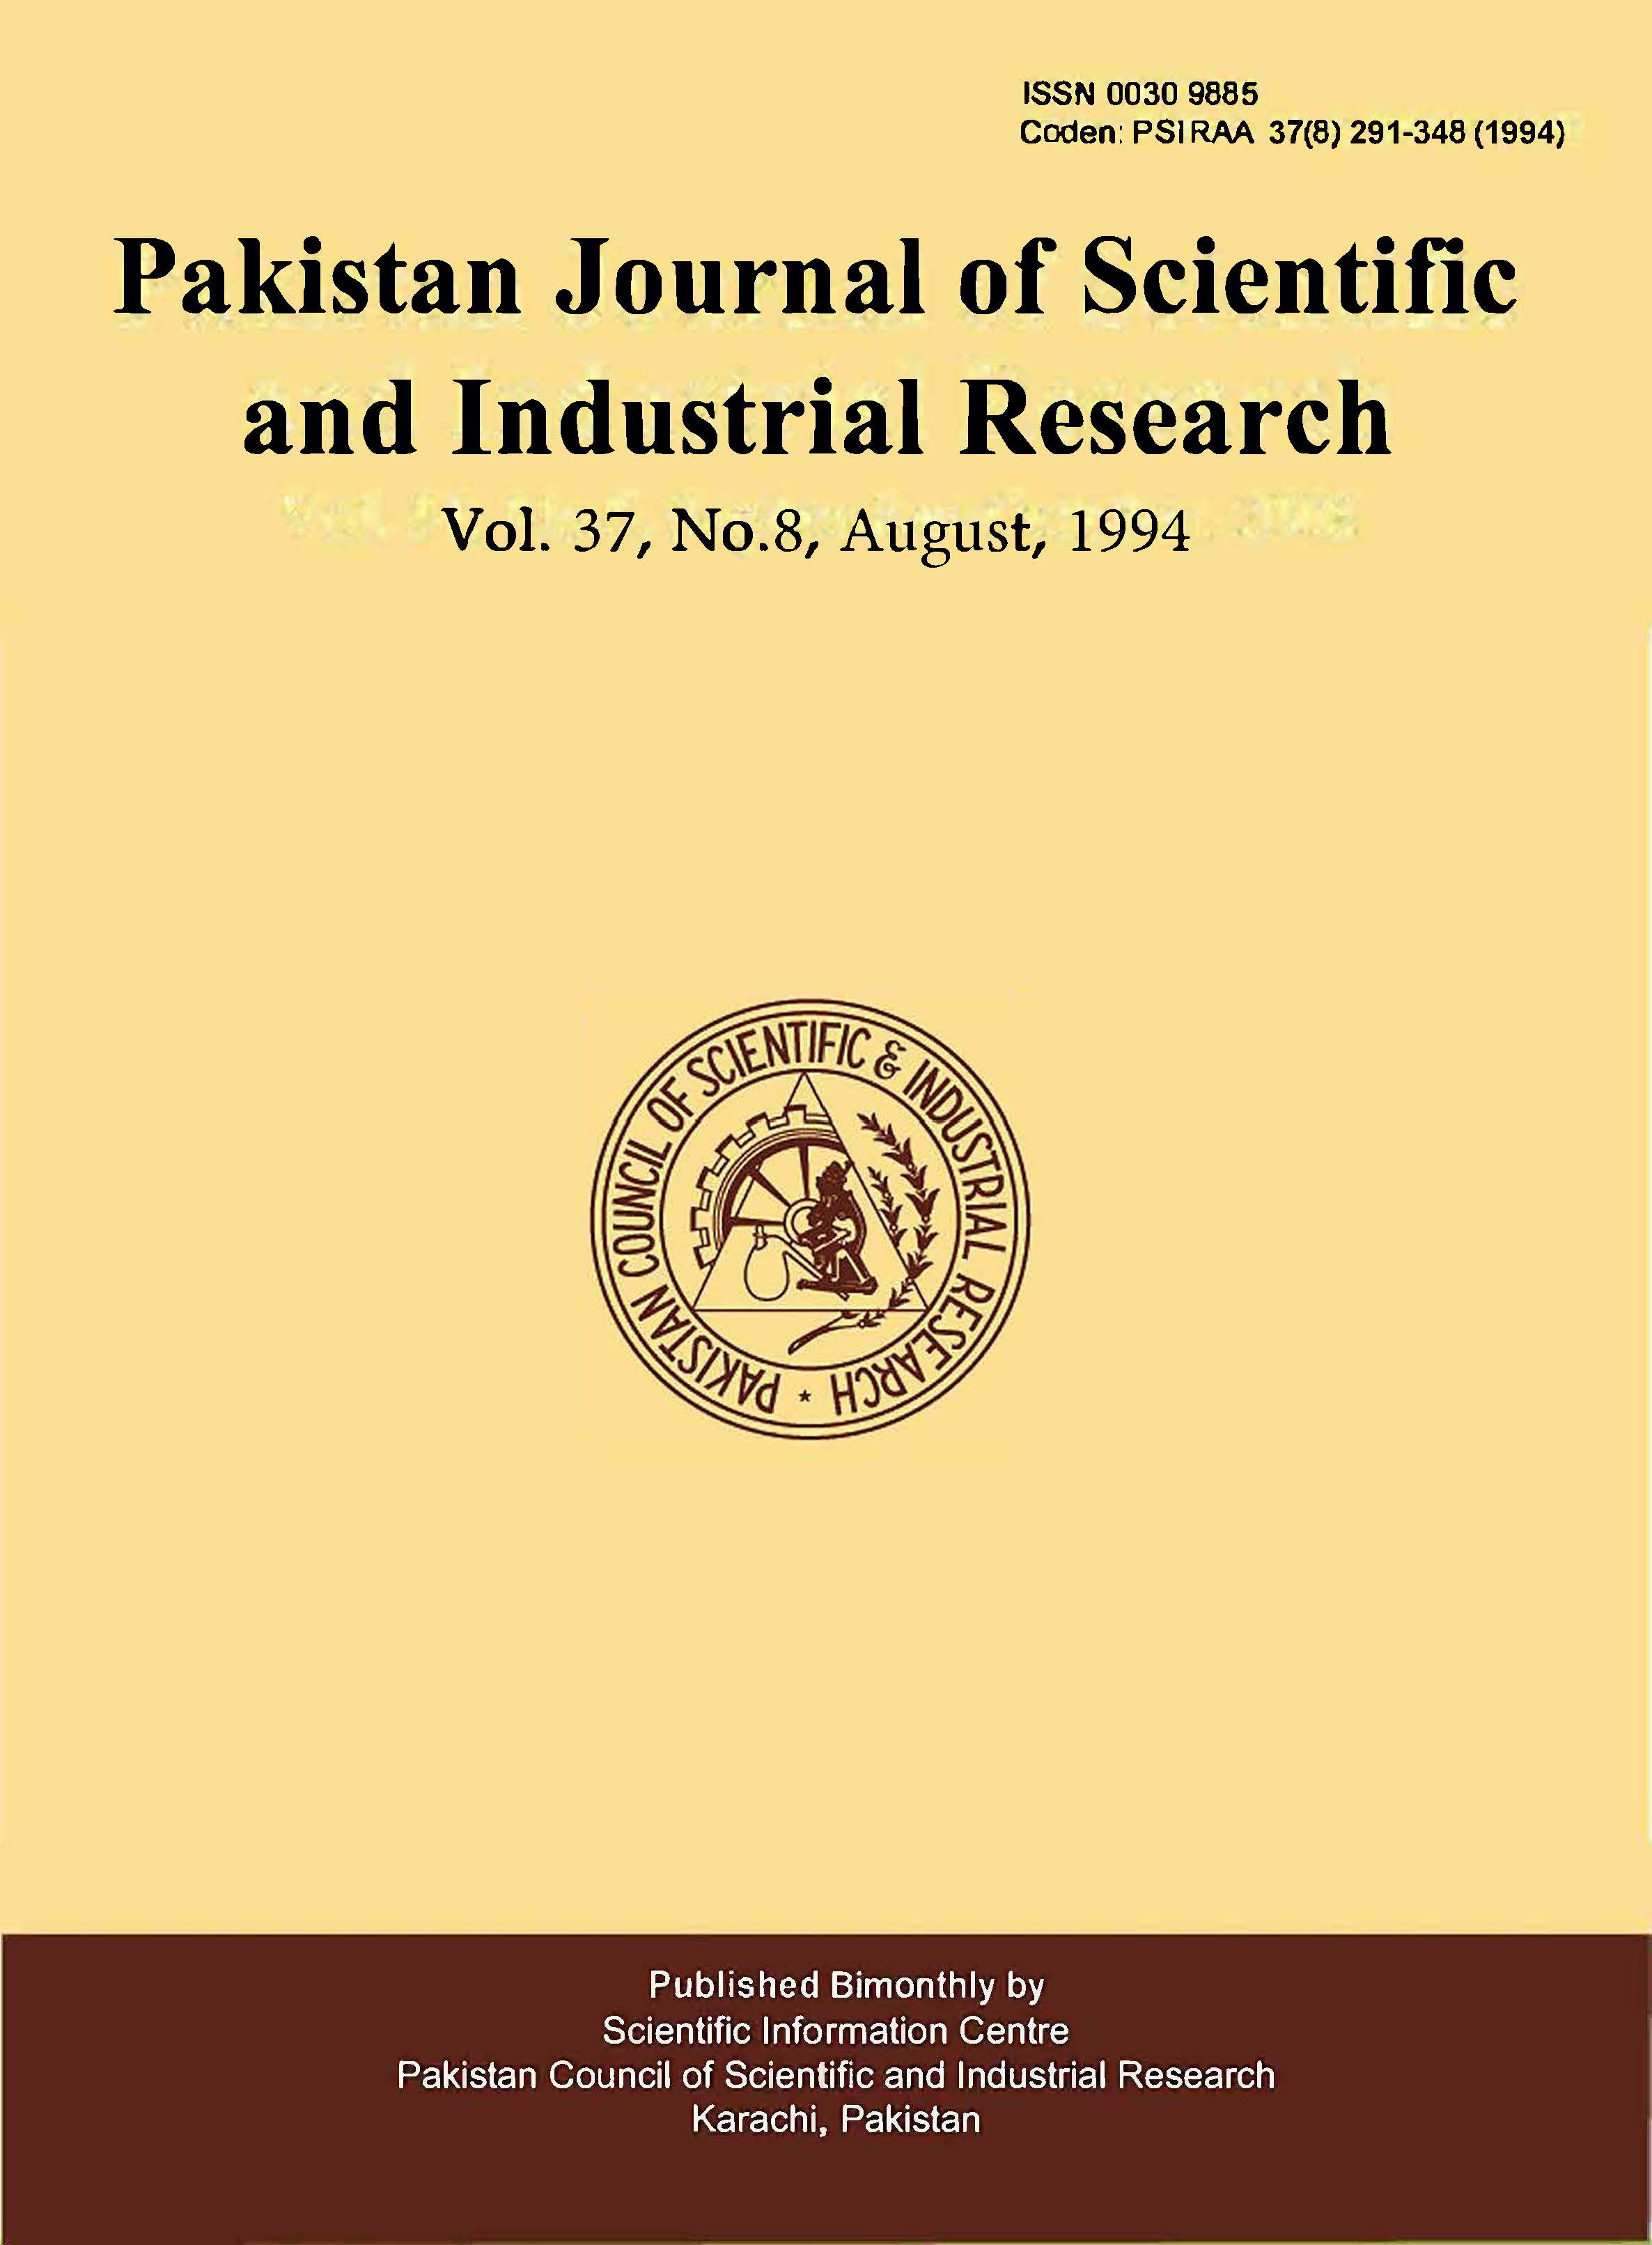 					View Vol. 37 No. 8 (1994): Pakistan Journal of Scientific and Industrial Research
				